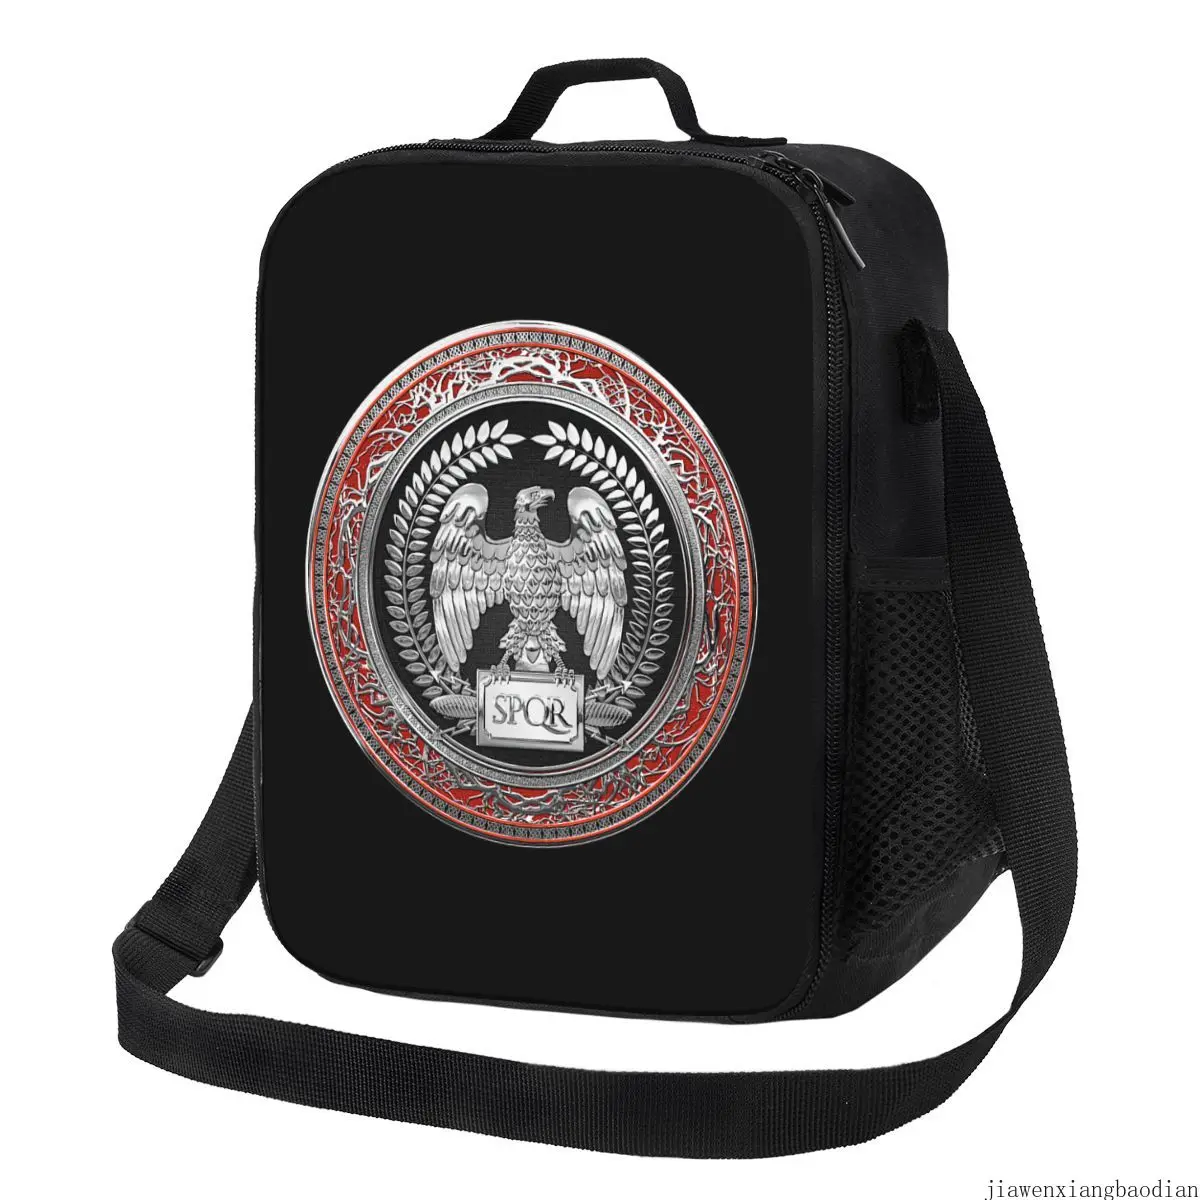 

Roman Empire Eagle Resuable Lunch Boxes Rome SPQR Emblem Thermal Cooler Food Insulated Lunch Bag Kids School Children